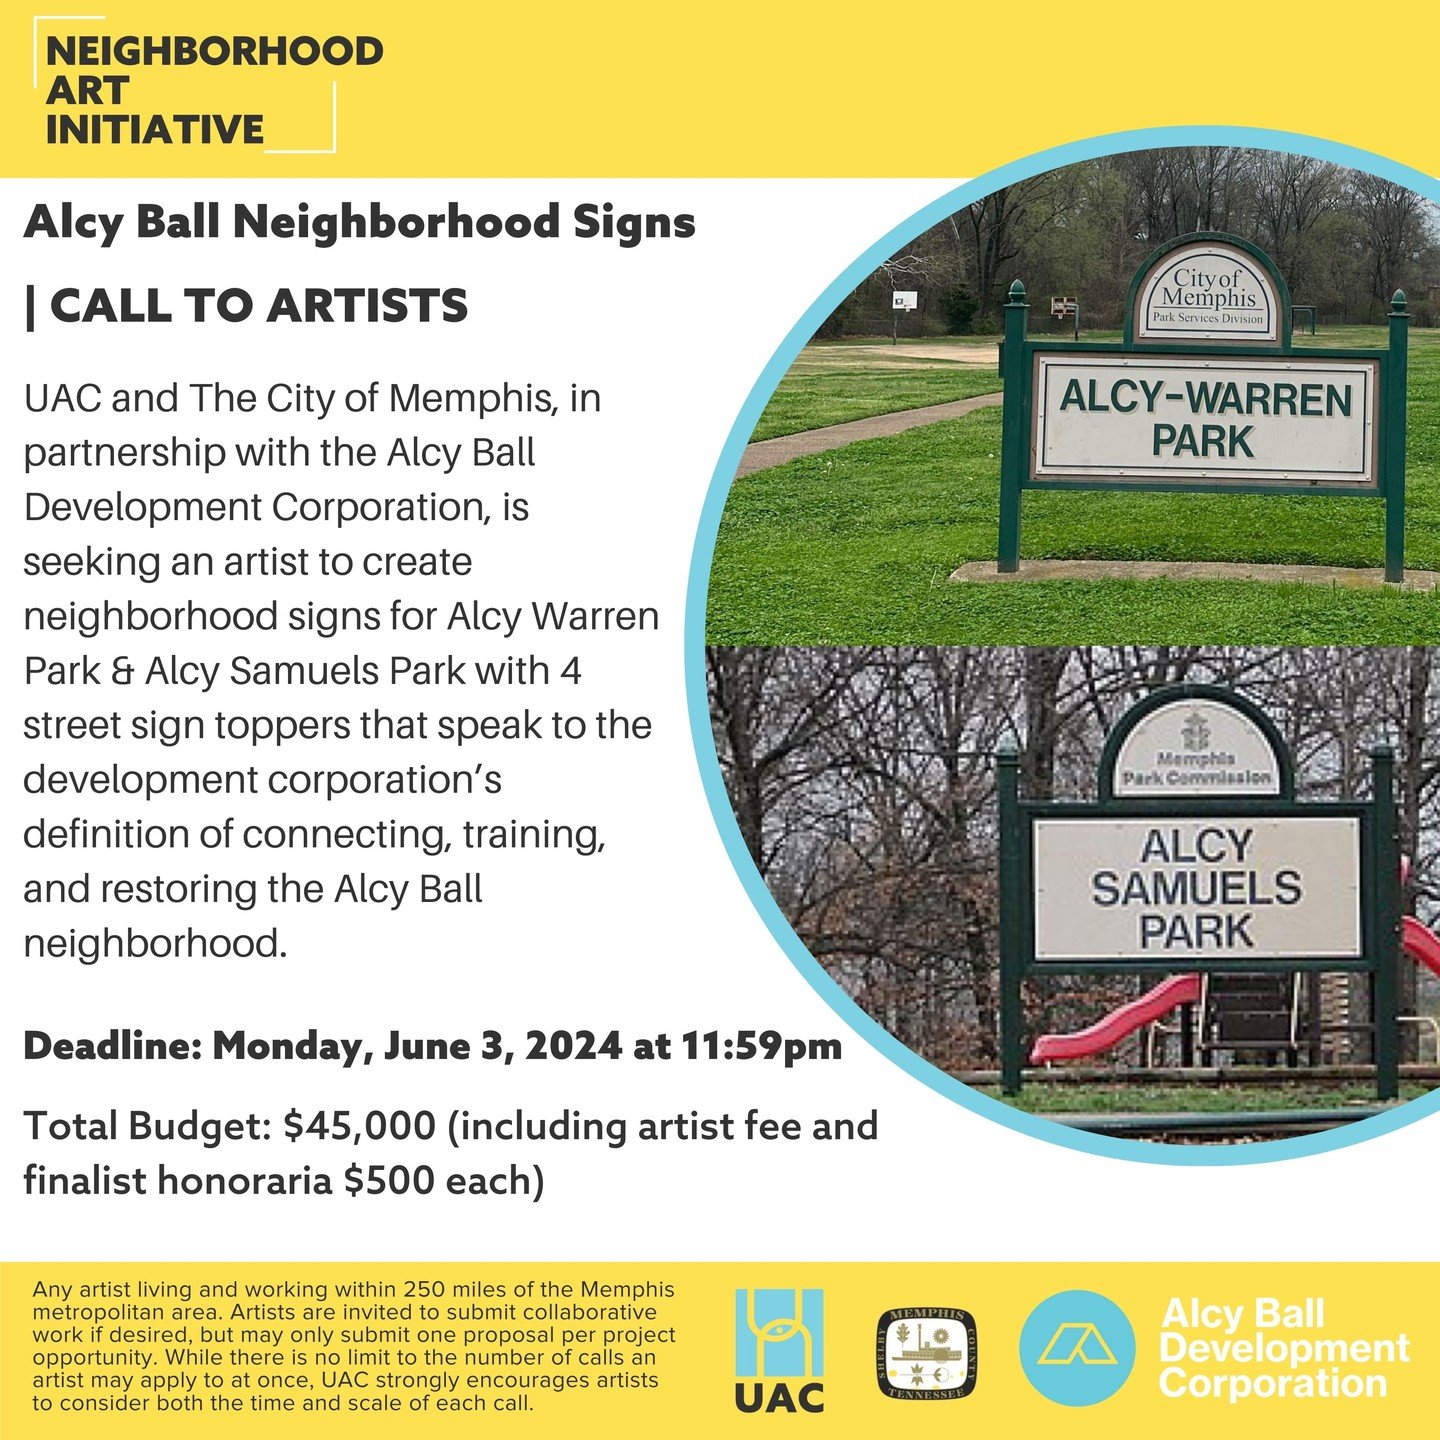 UAC and The City of Memphis, in partnership with the Alcy Ball Development Corporation, is seeking an artist to create neighborhood signs for Alcy Warren Park &amp; Alcy Samuels Park with 4 street sign toppers that speak to the development corporatio